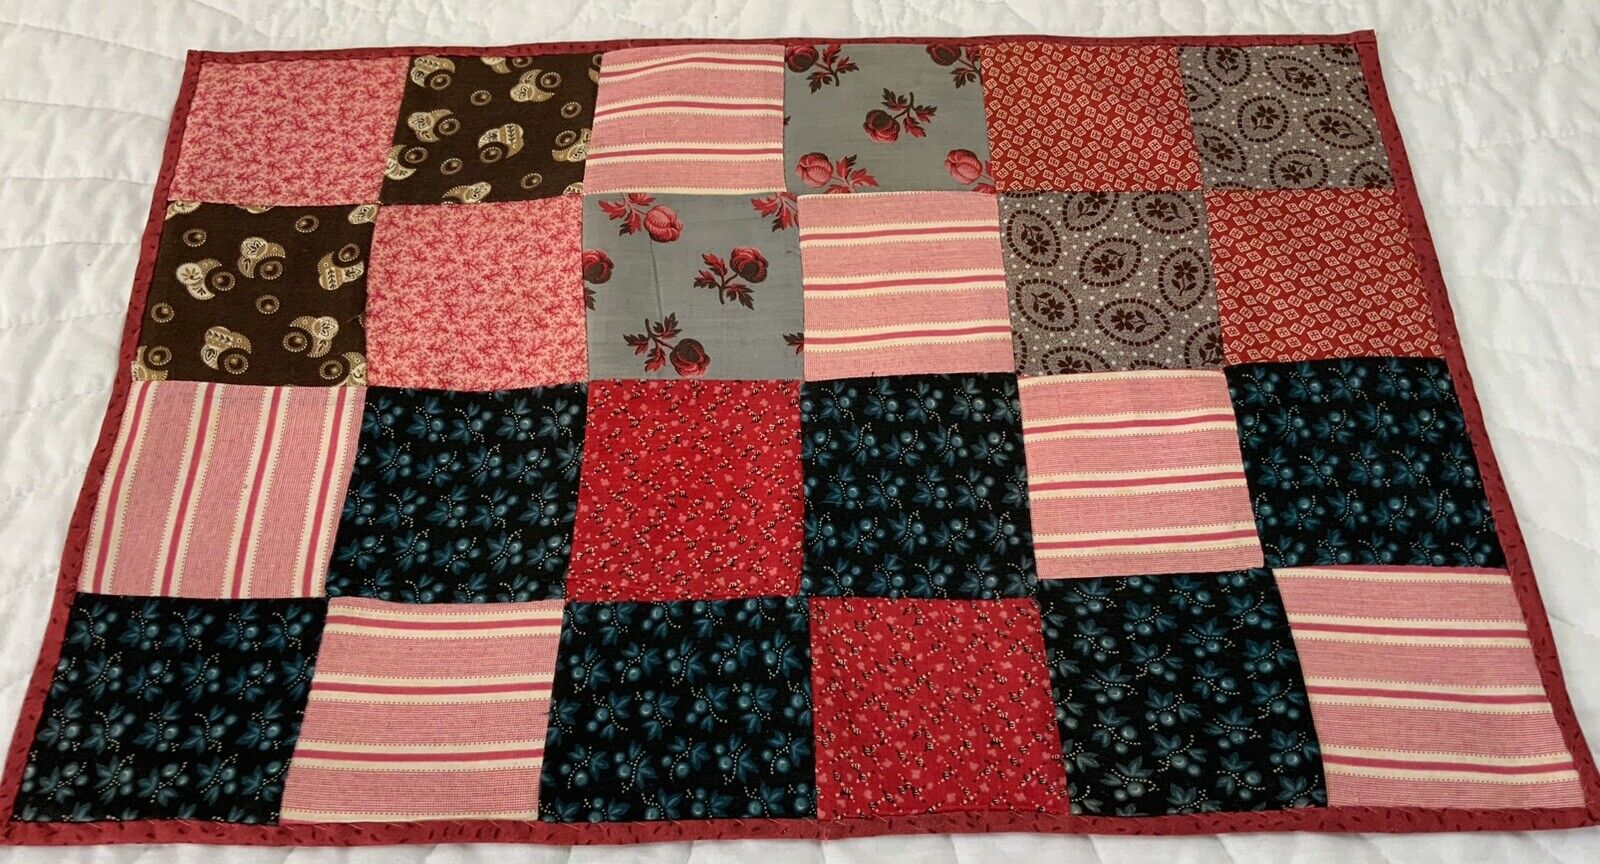 Vintage Antique Quilt Table Topper, Four Patch, Early Calico Prints, Pink, Red